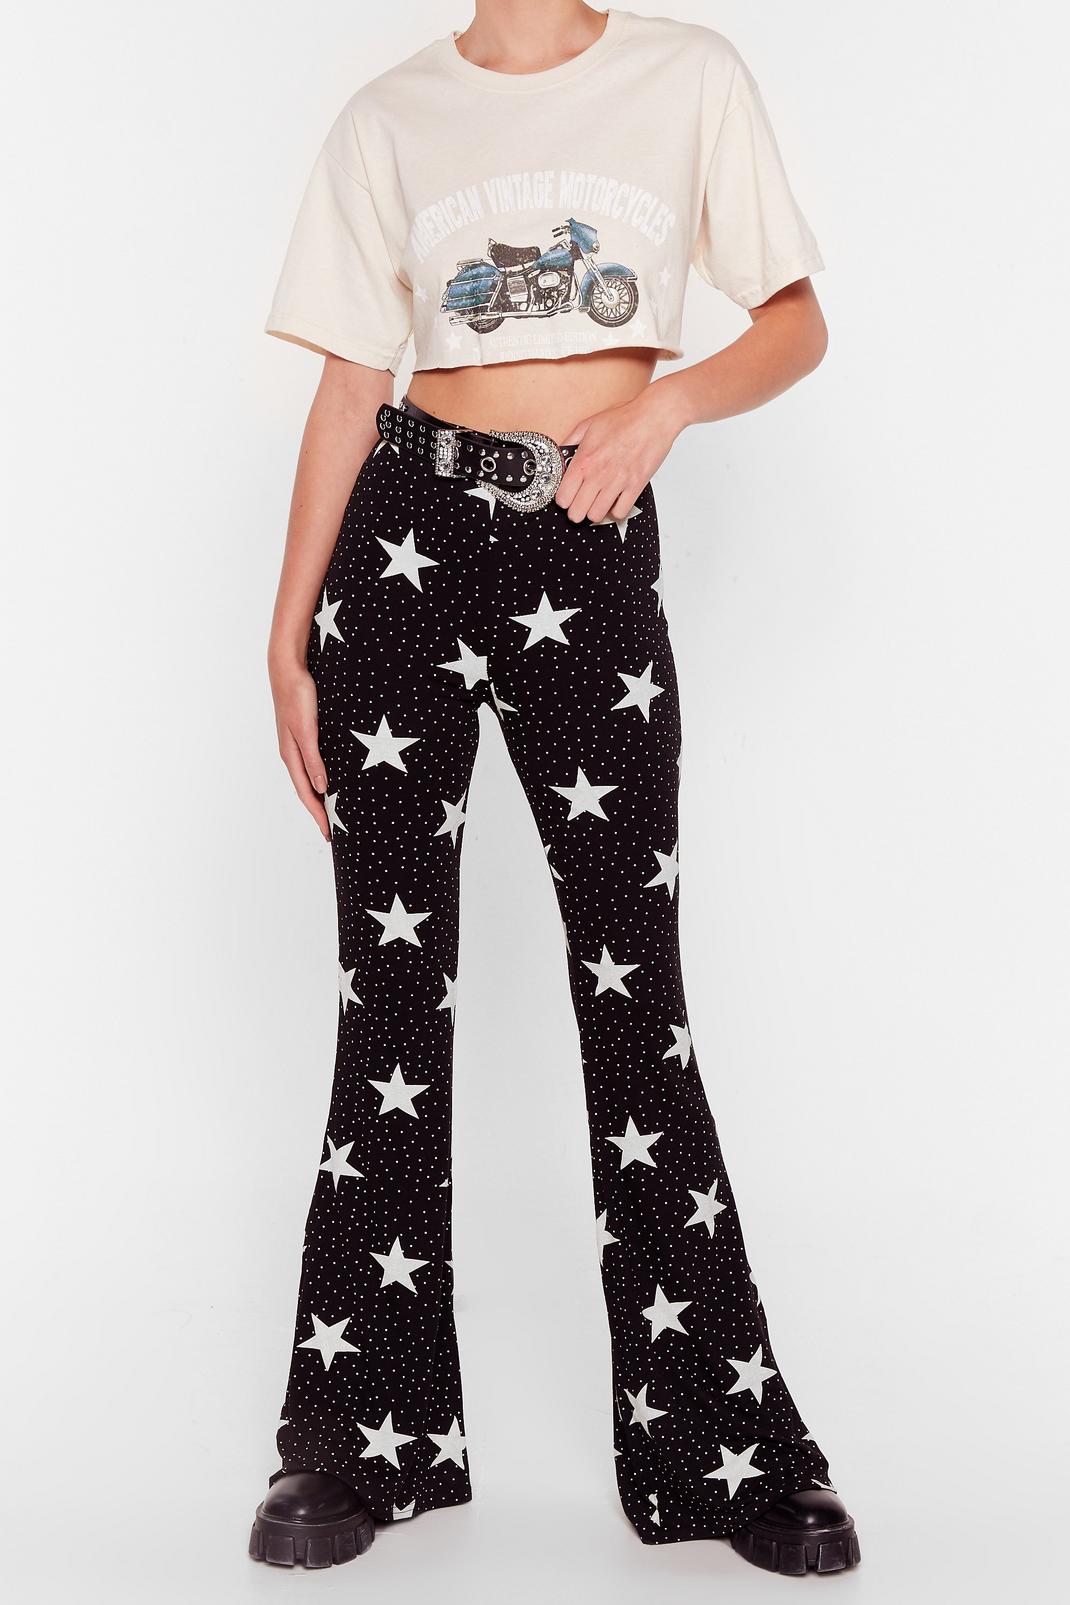 Sky Full of Stars High-Waisted Flare Pants image number 1